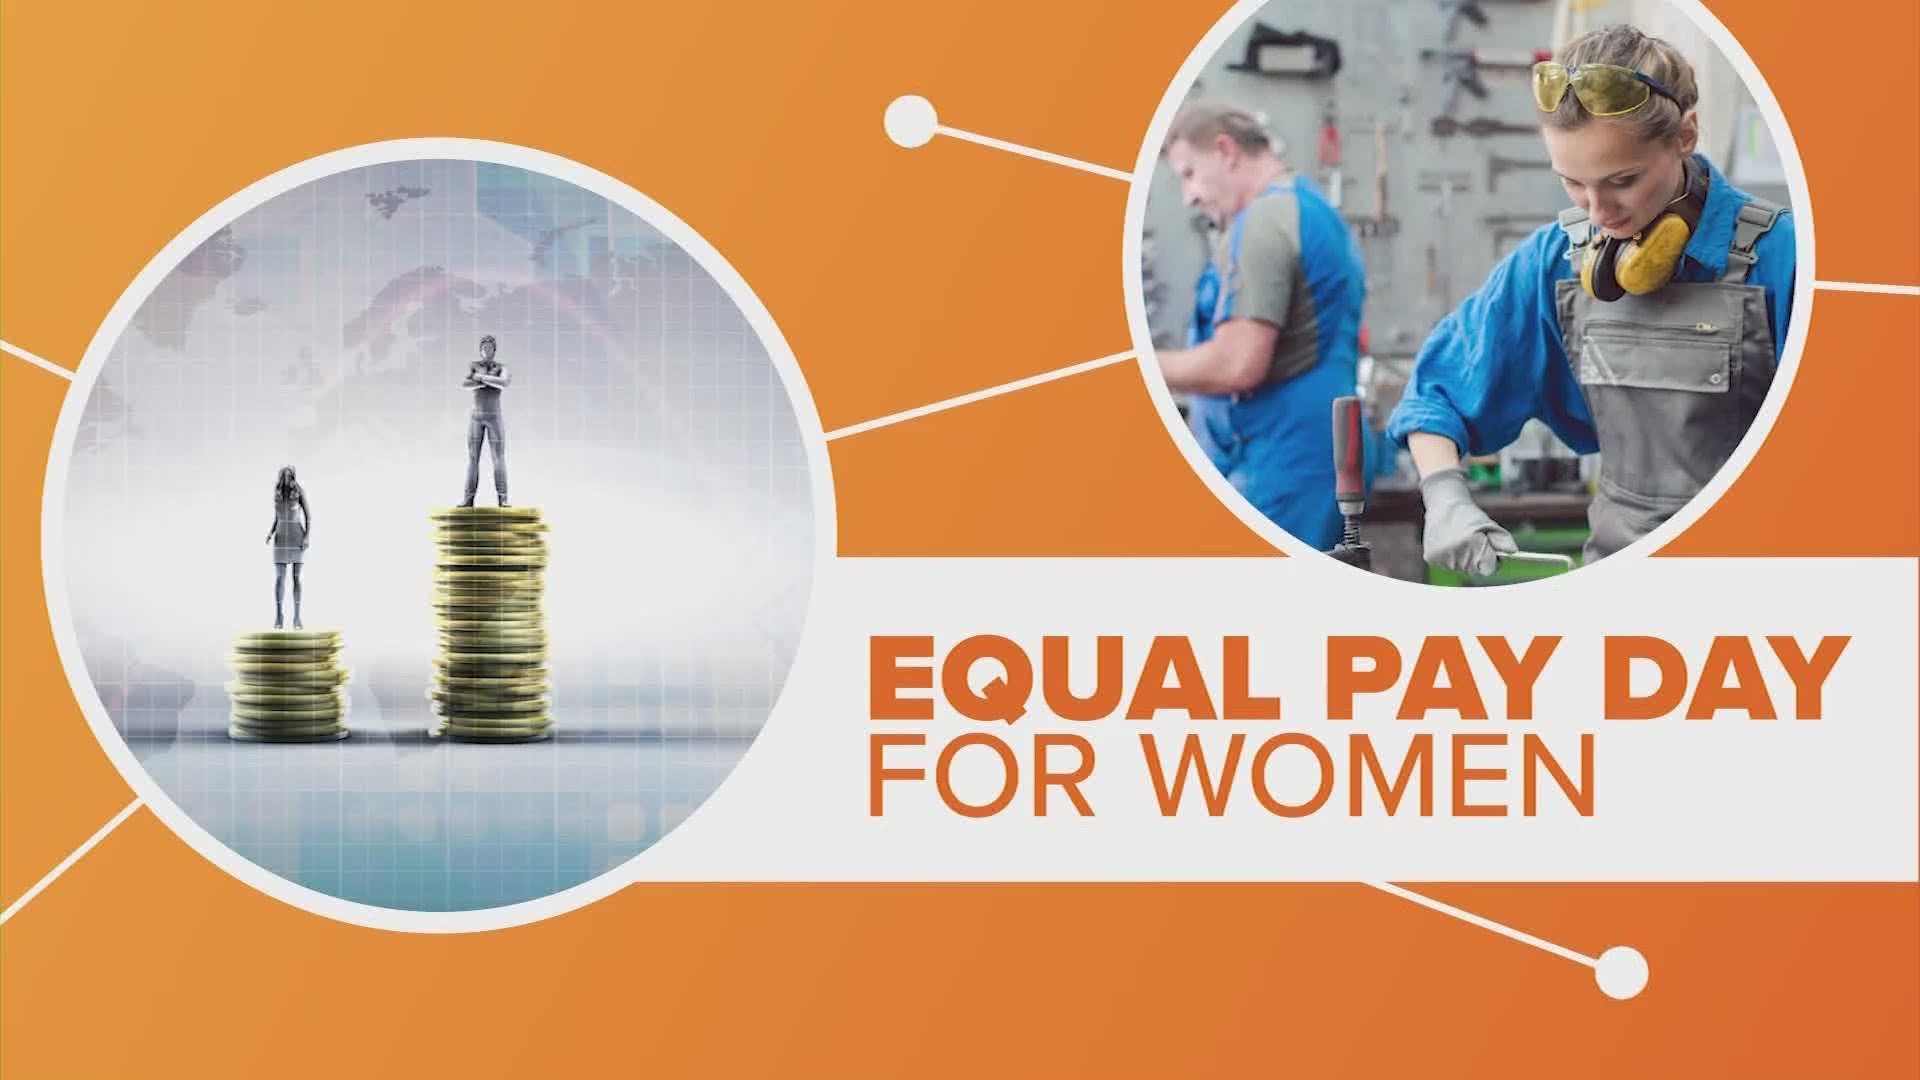 Equal pay day represents how far into a new year a woman must work to be paid the same as a man for the year before